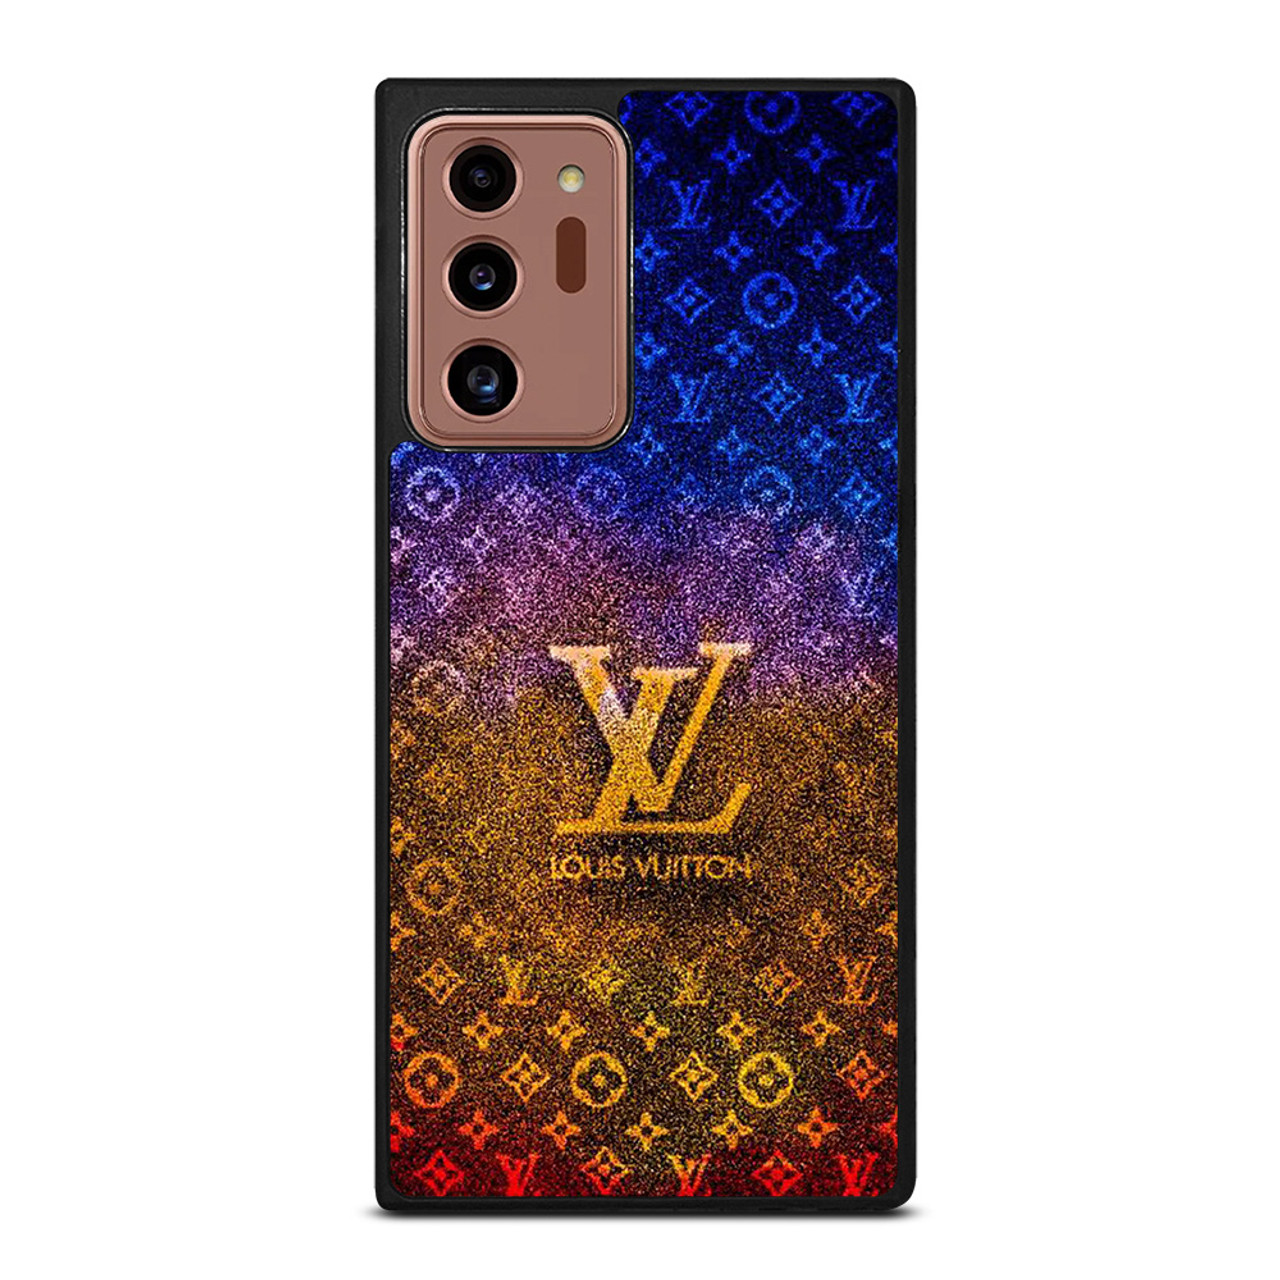 LOUIS VUITTON LV MELTING LOGO PATTERN Samsung Galaxy Note 20 Case Cover